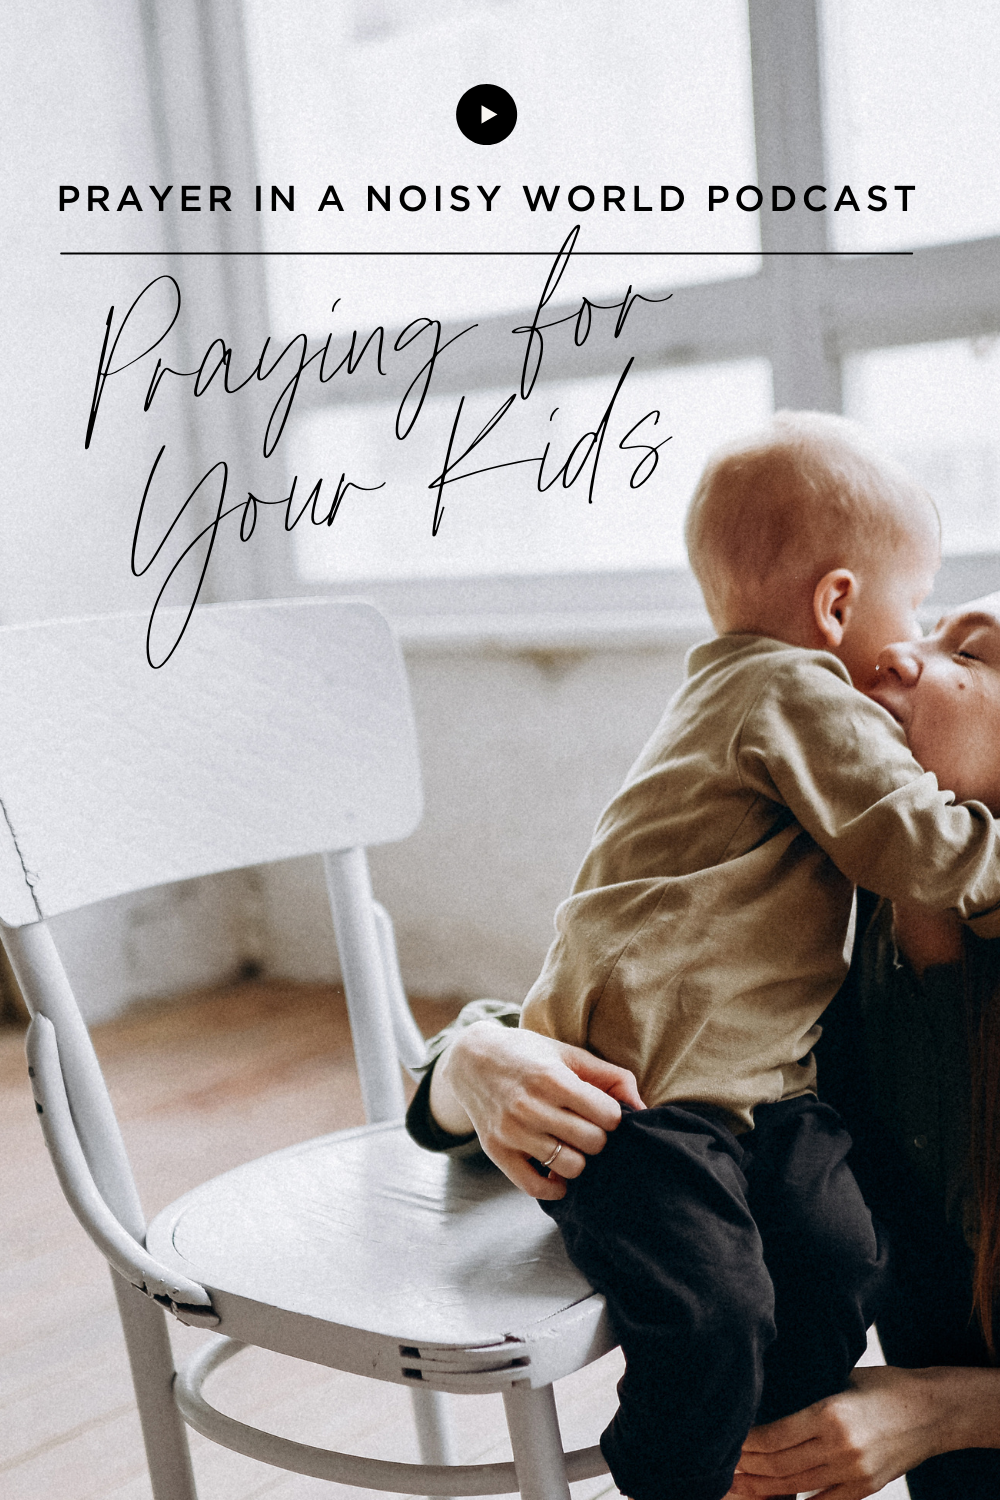 On the Podcast: Praying for your kids by Valerie Woerner, prayer journal, women's ministry, prayer, refresh, meditation, how to make a prayer journal, praying for your husband, prayer warrior, war room, Bible study, tools, prayer notebook, how to pray, prayer in a noisy world, bible, praying scripture, pray for kids